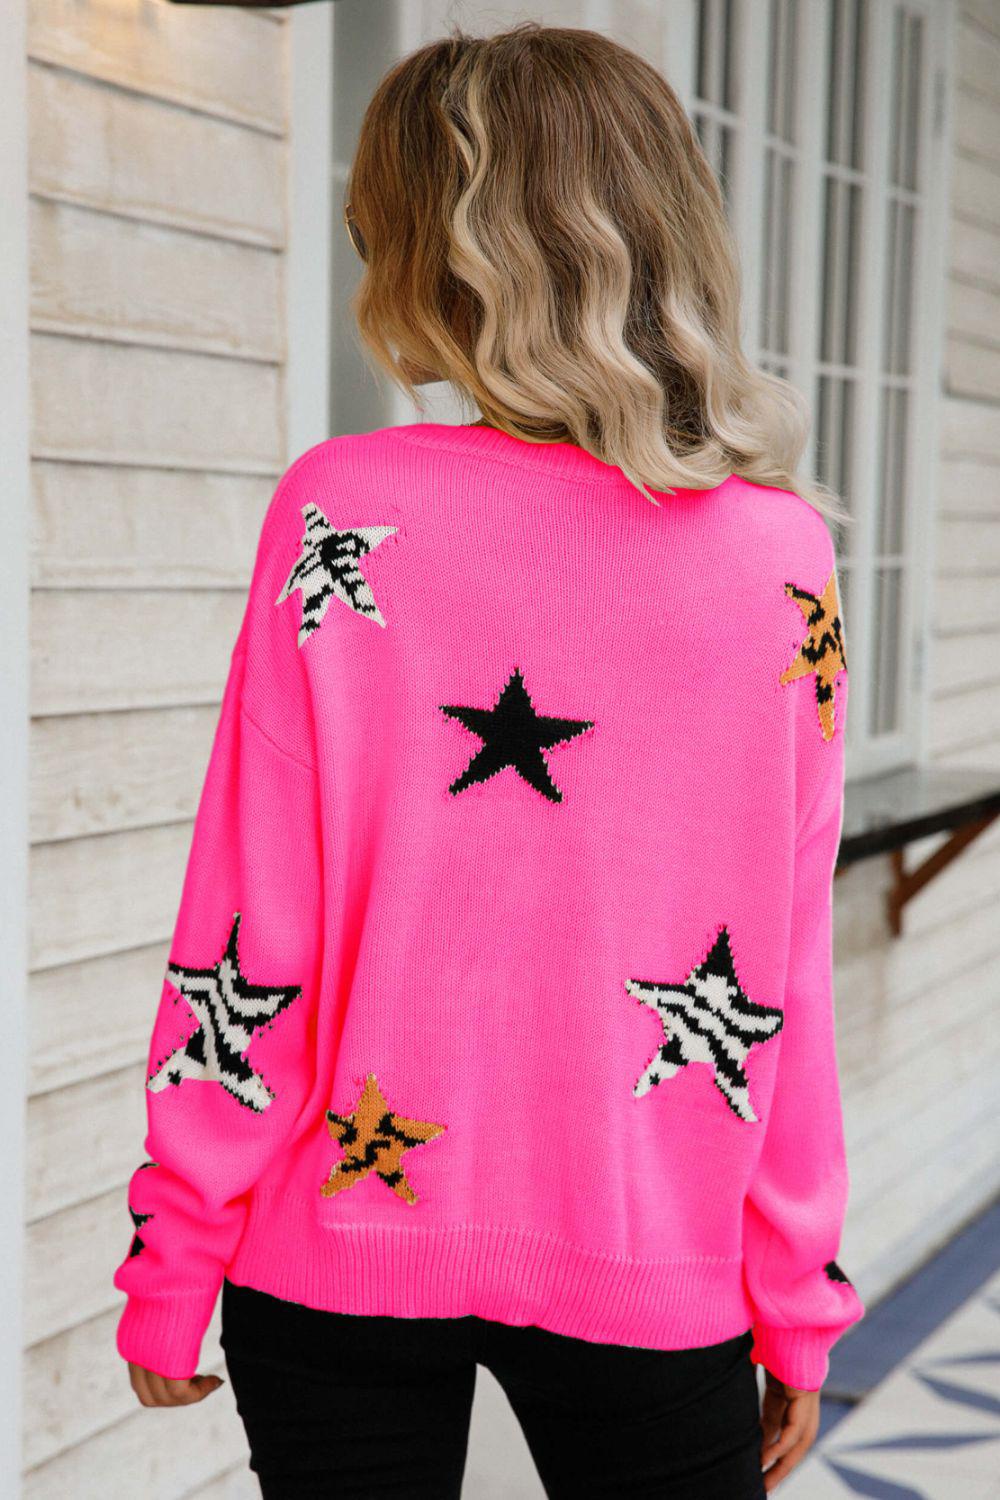 Star Pattern Round Neck Dropped Shoulder Sweater BLUE ZONE PLANET